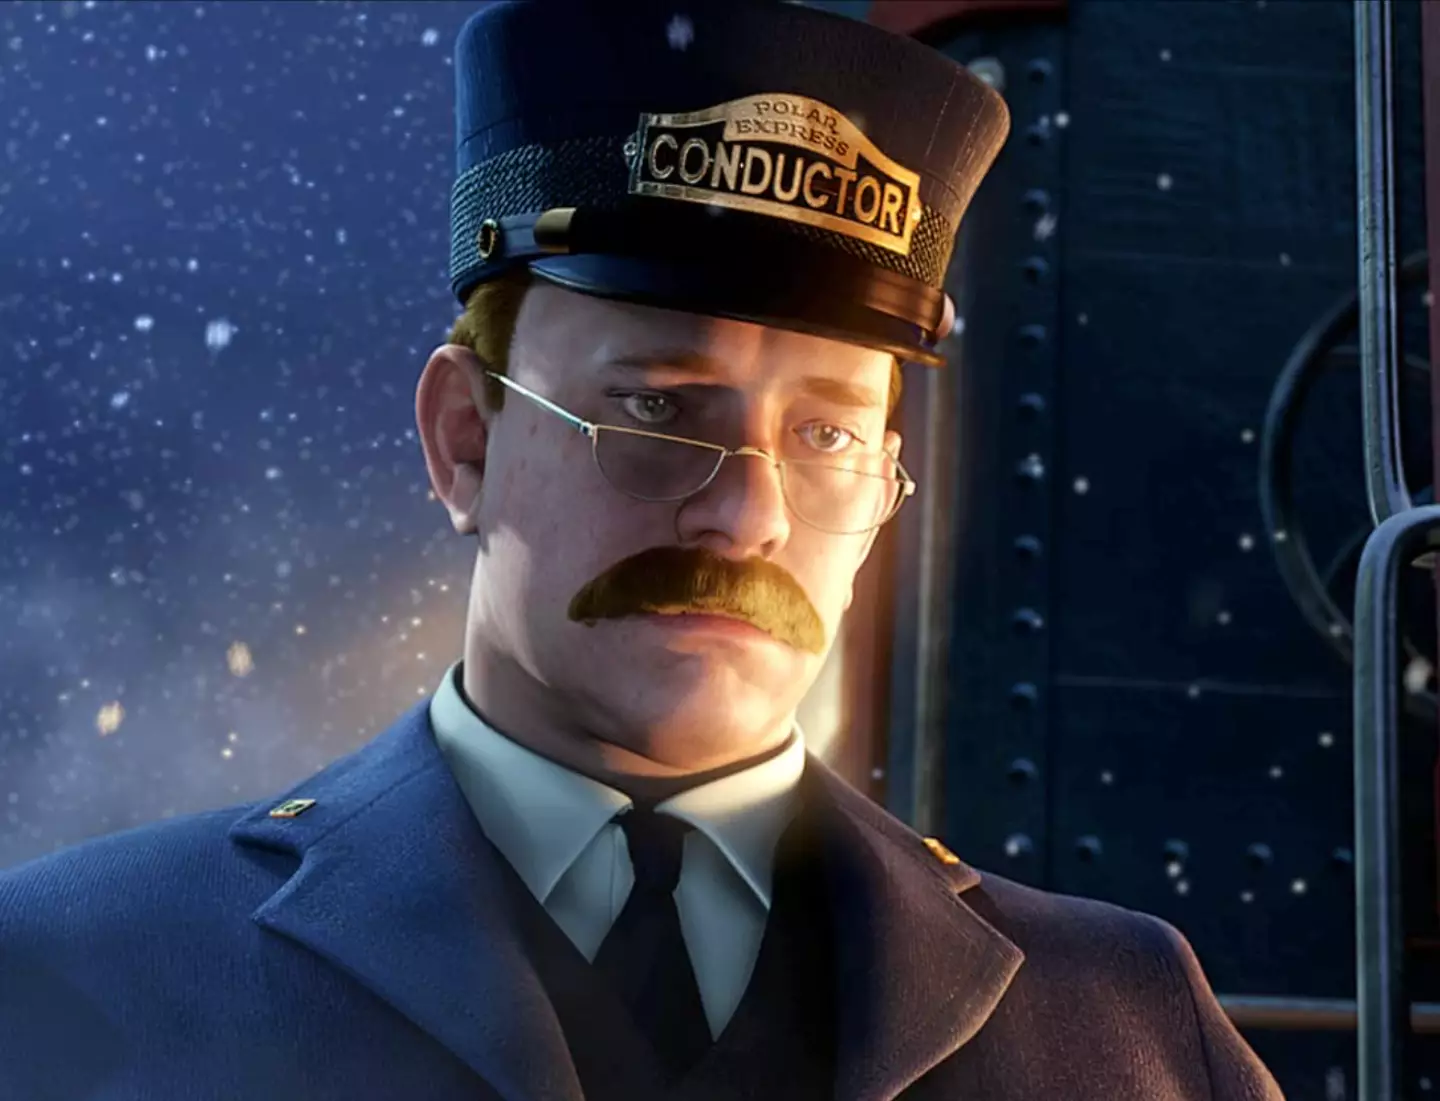 Tom Hanks' likeness was used for The Polar Express.